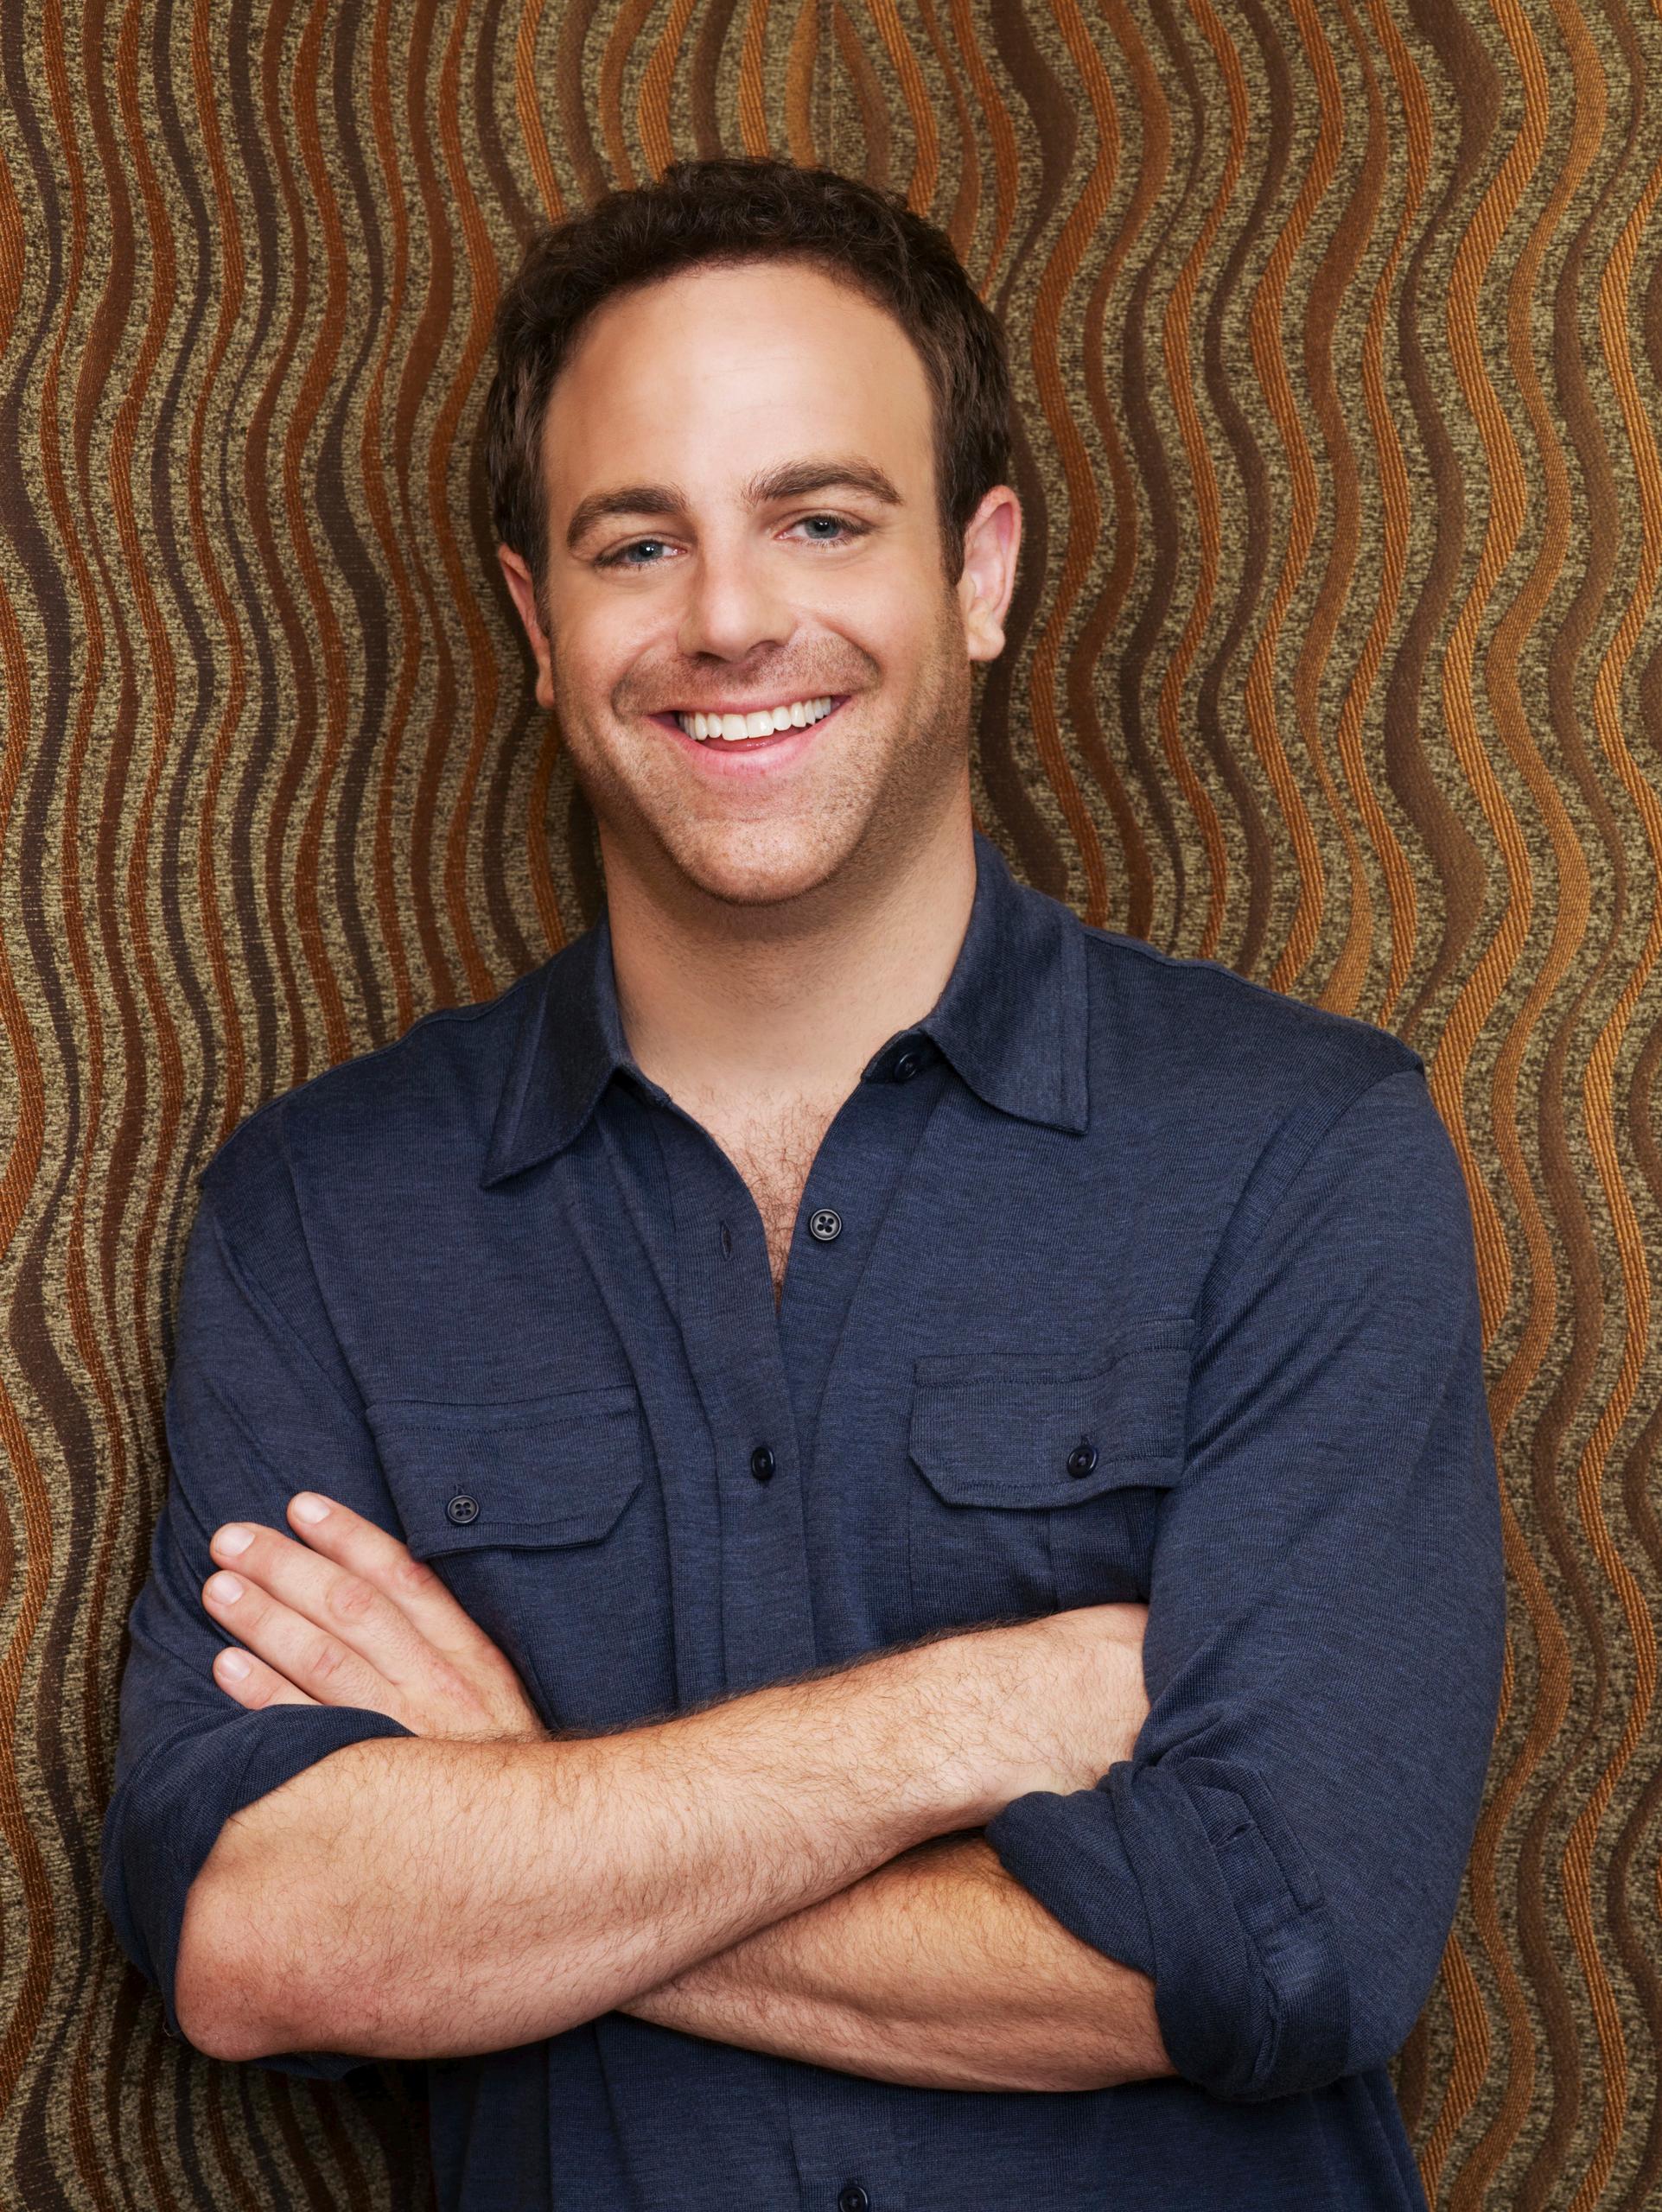 Paul Adelstein - Famous American television actor